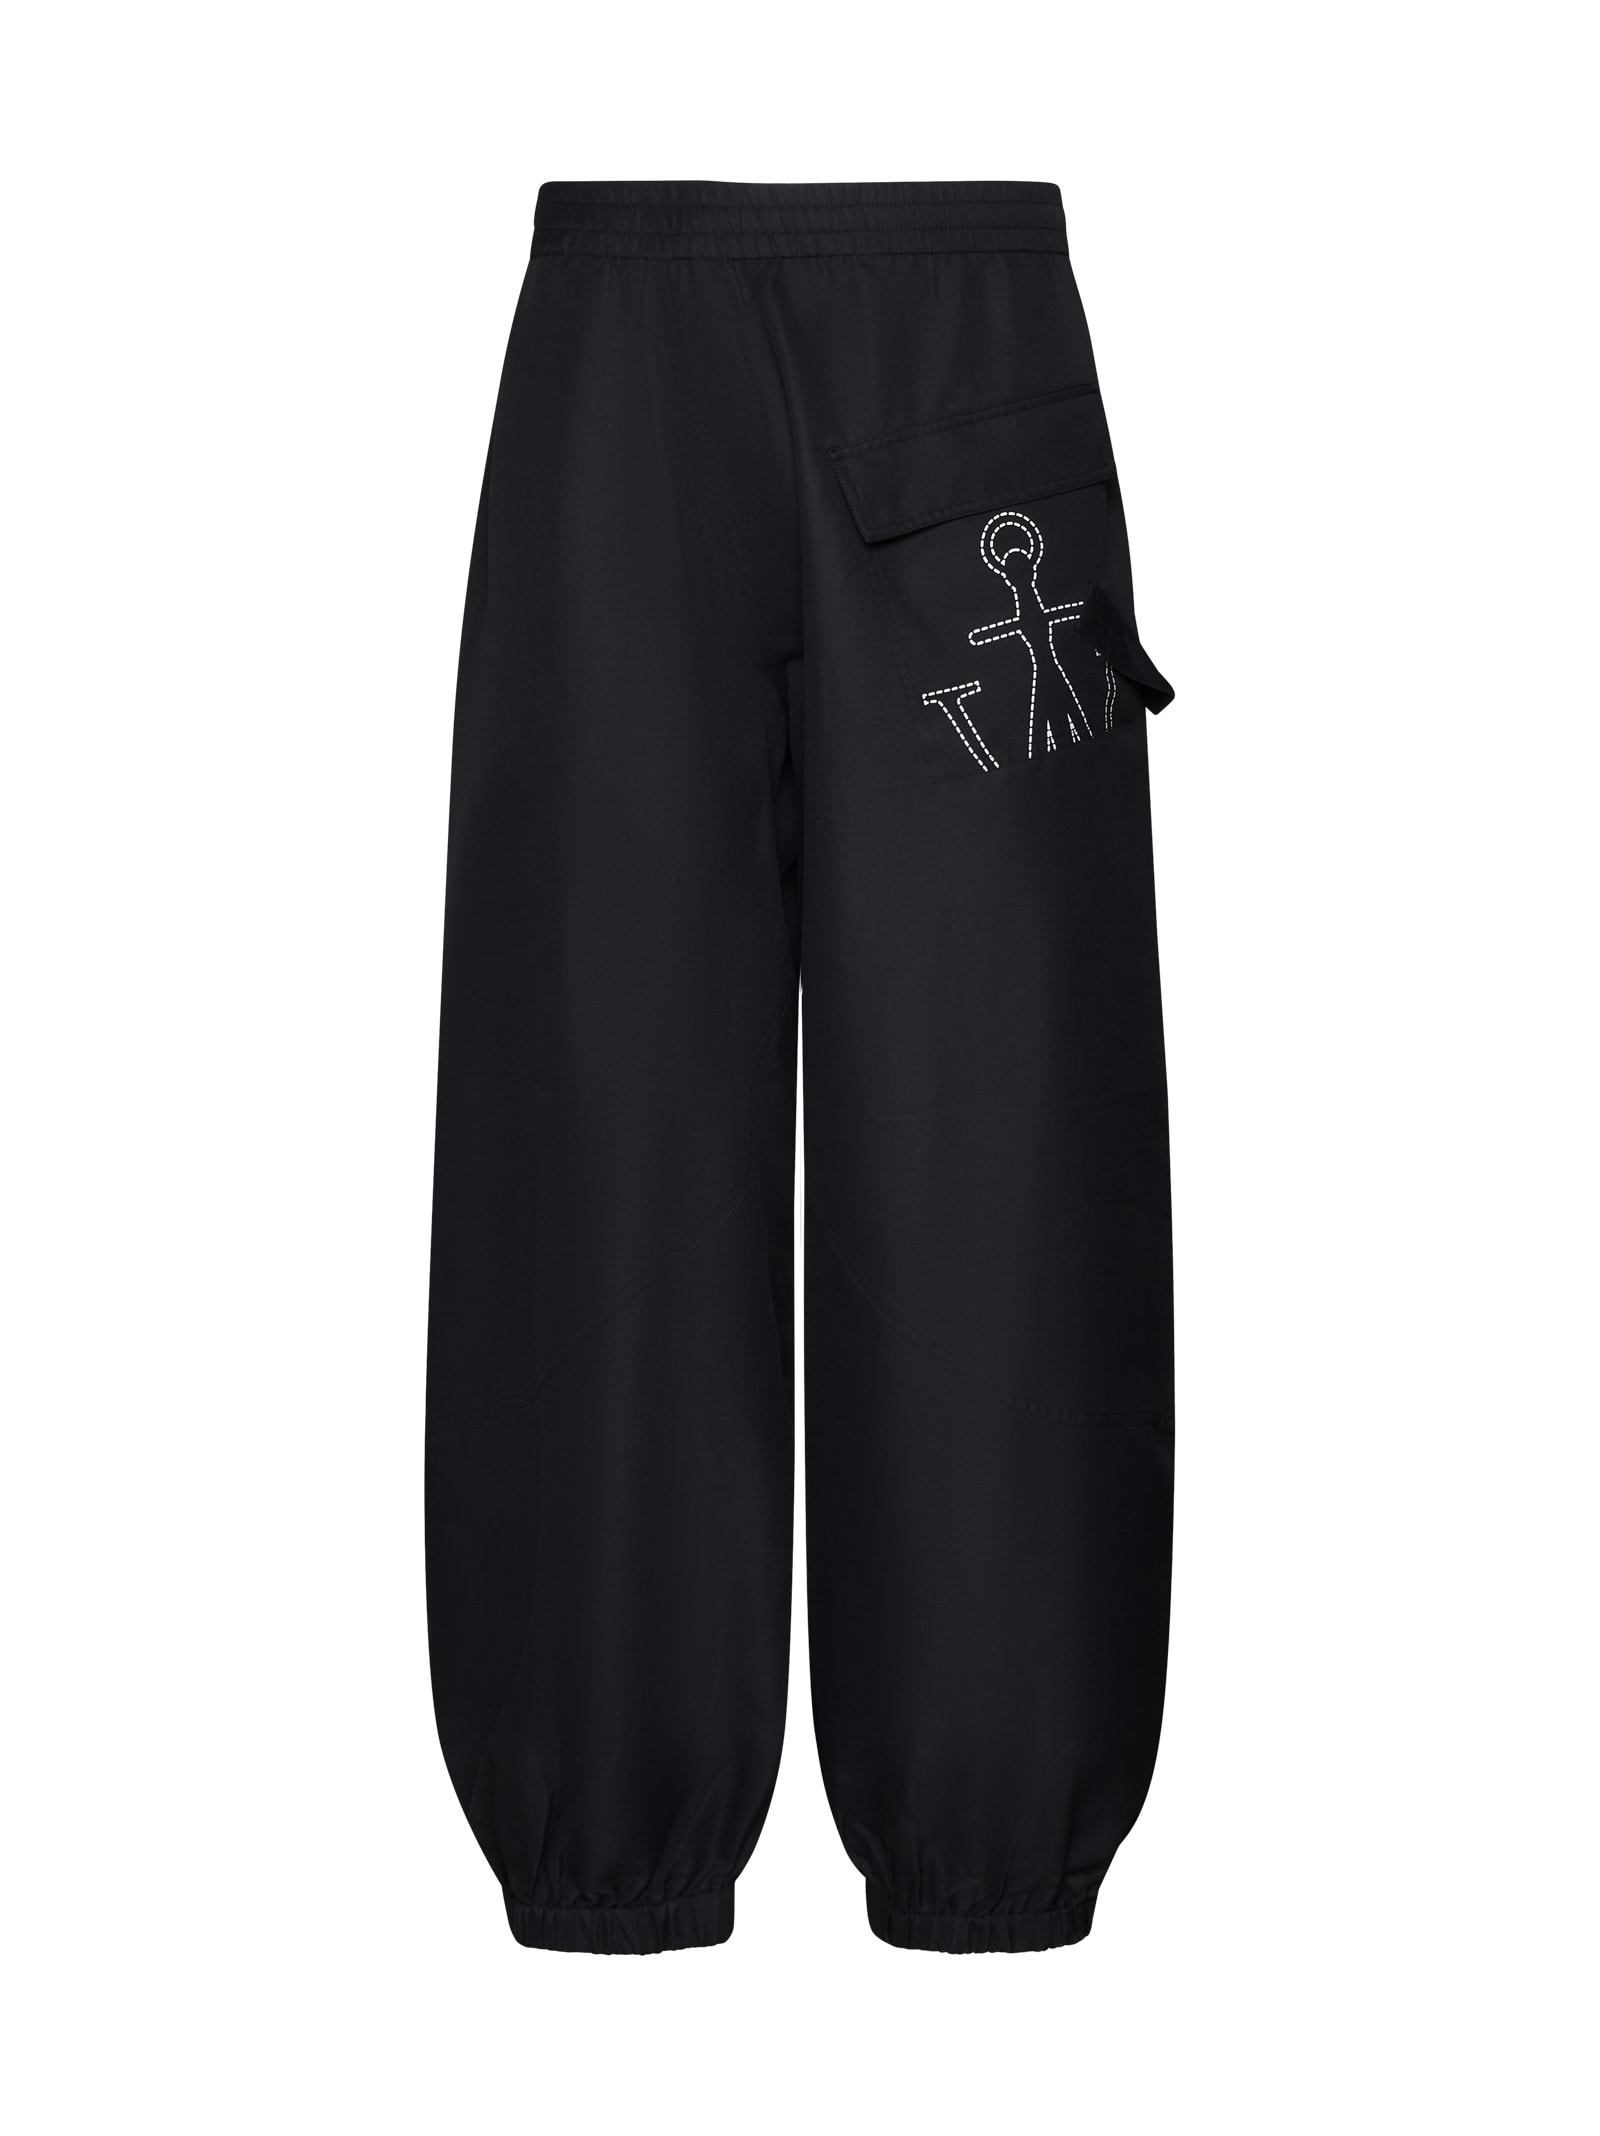 JW ANDERSON trousers